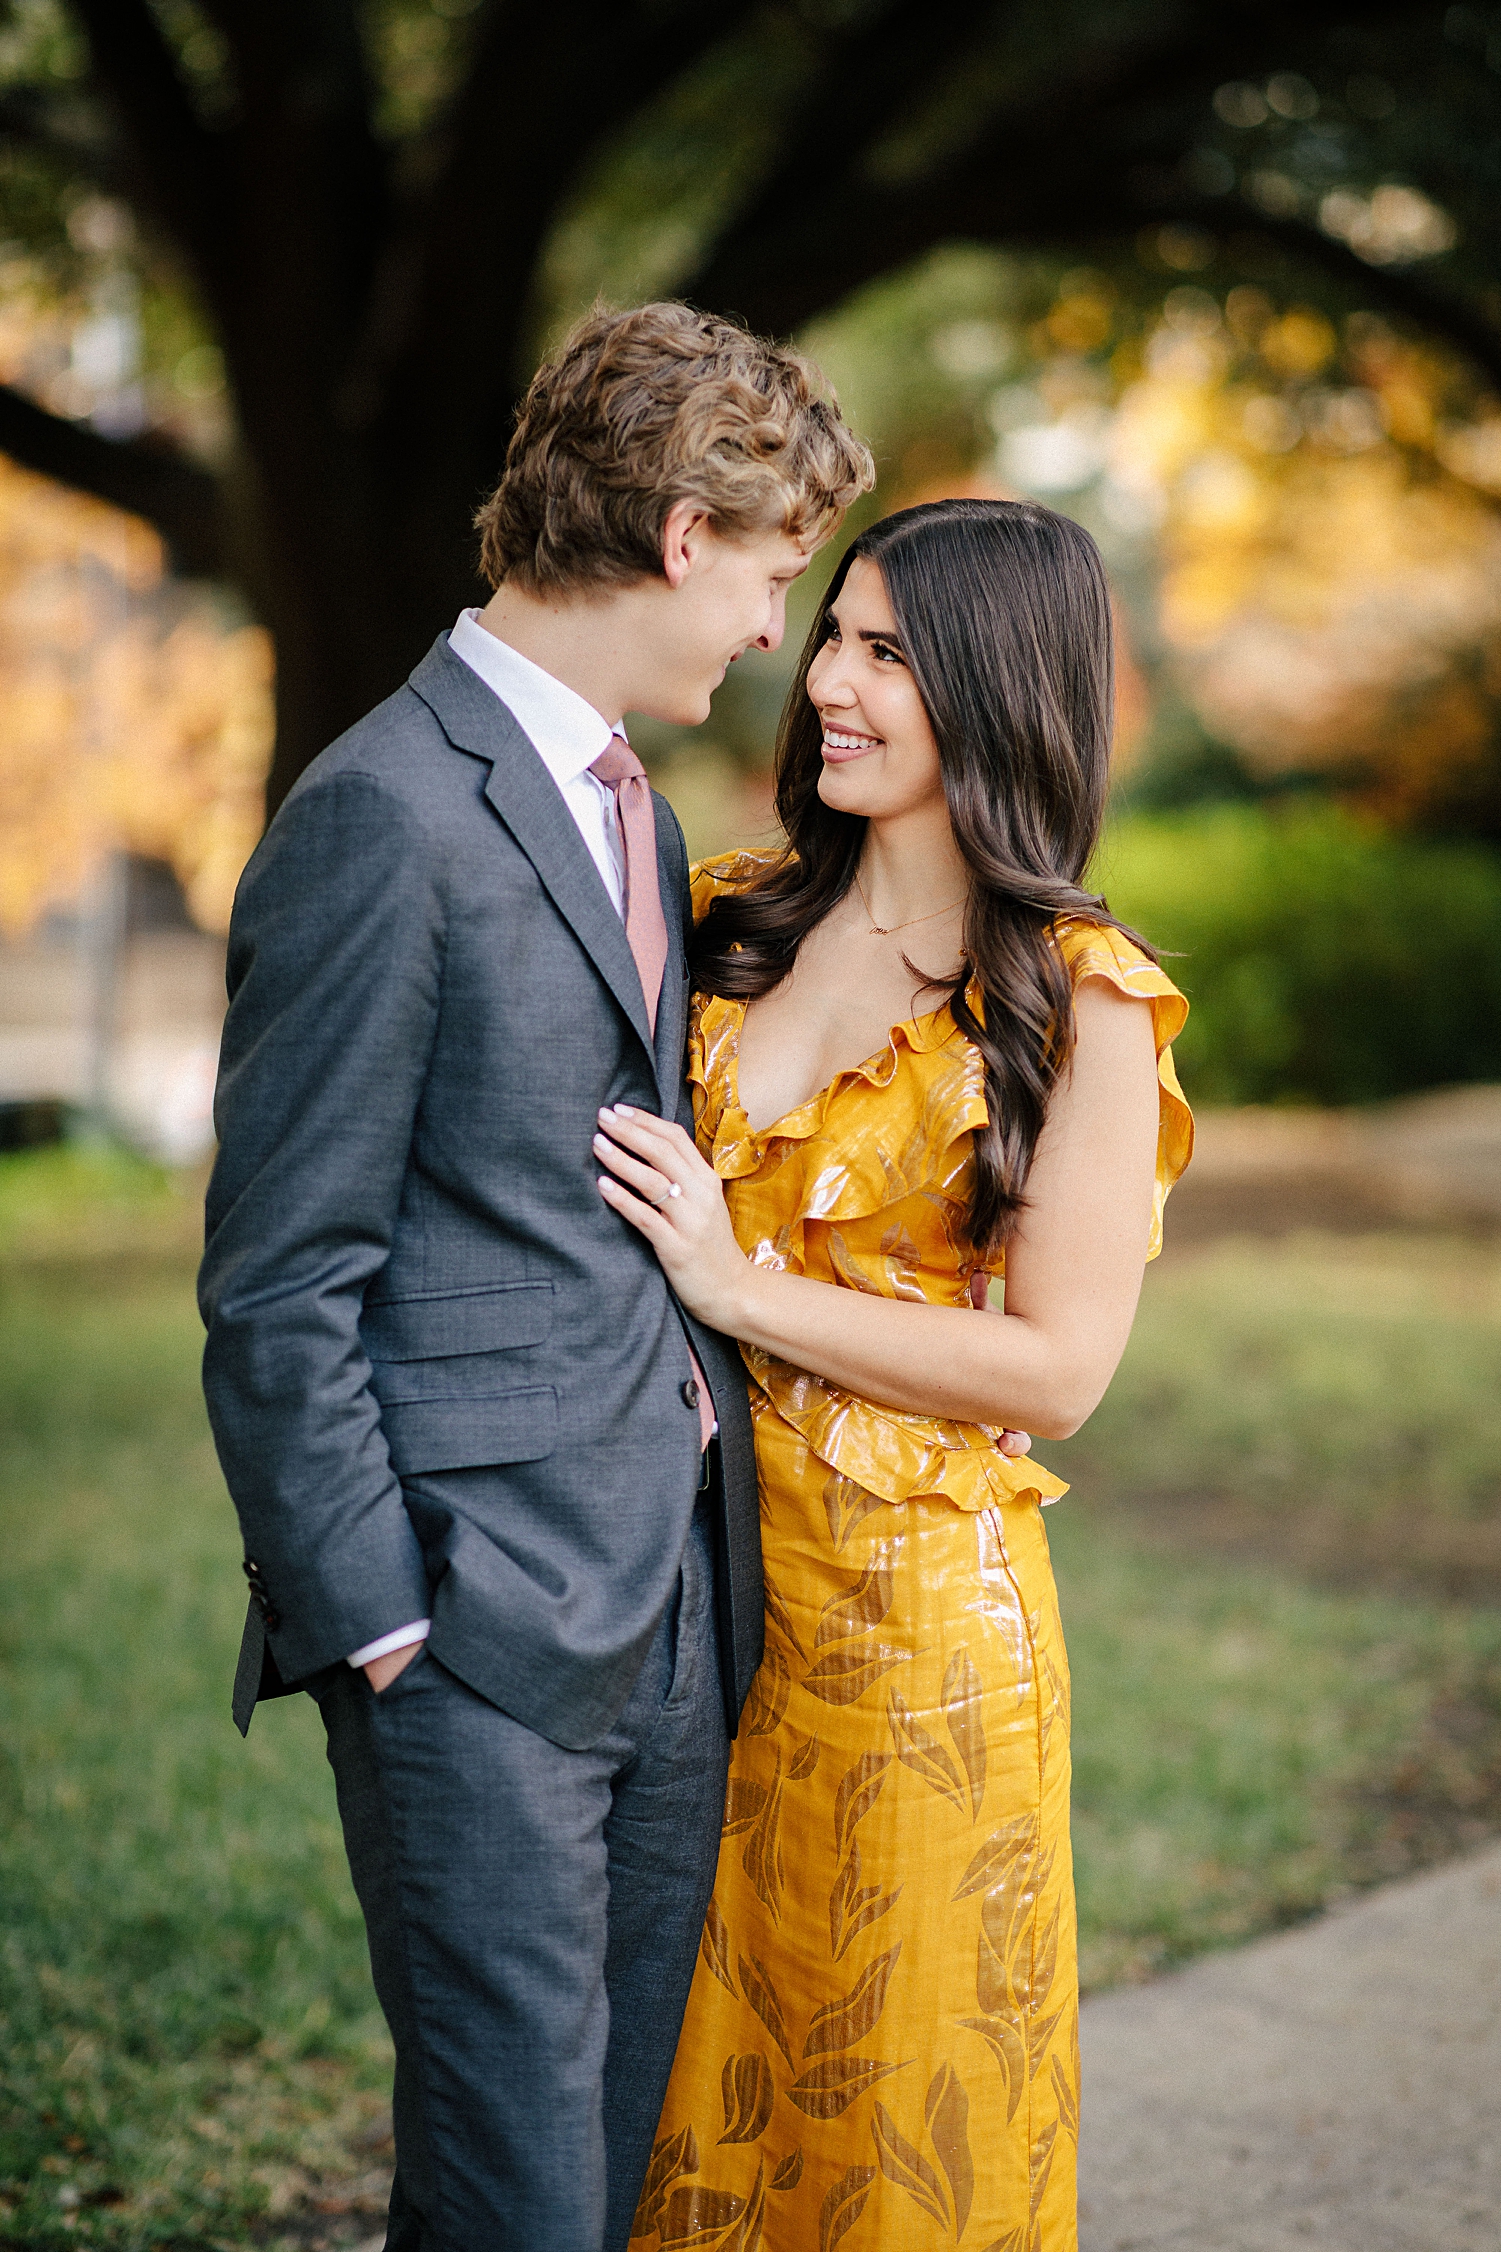 woman in yellow dress standing with man in suit in park